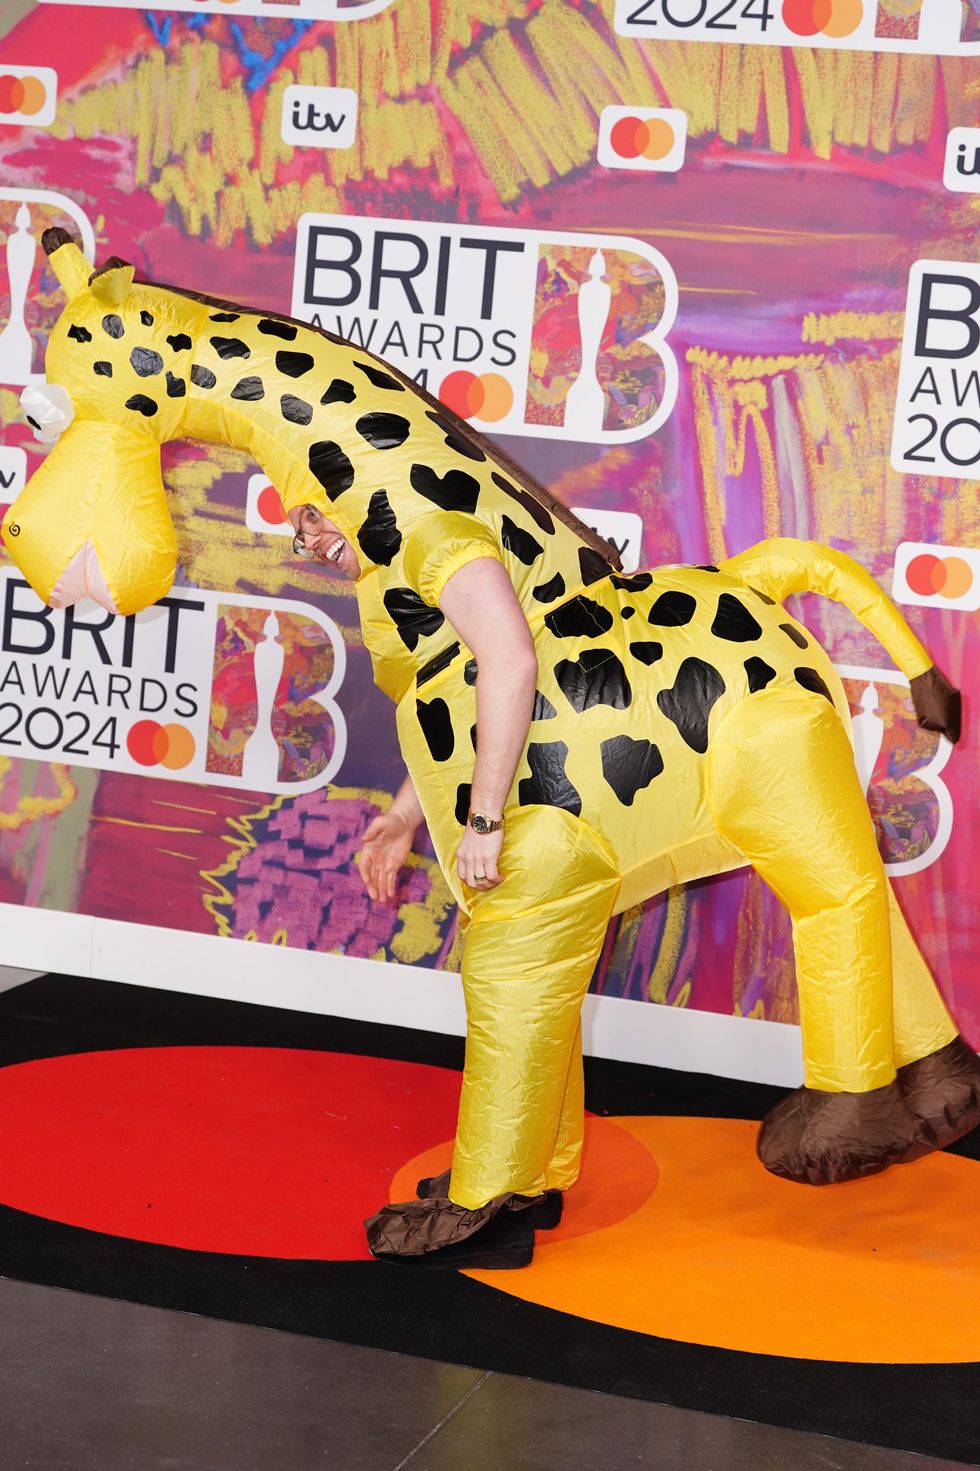 Rob Beckett turns up at Brit Awards in inflatable giraffe costume